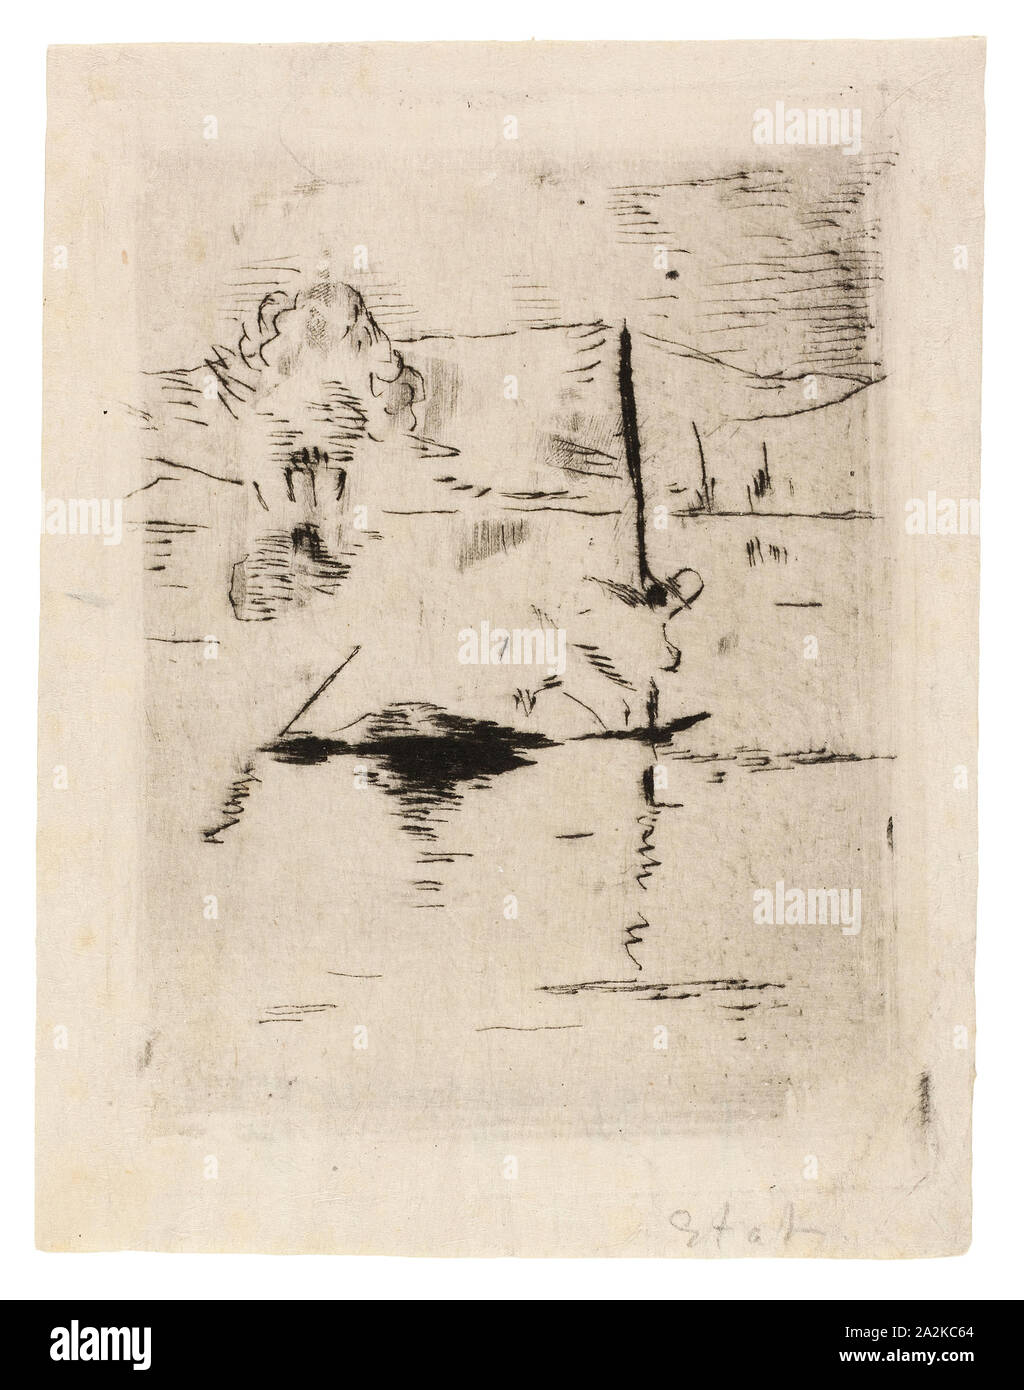 The River in the Plain, 1874, Édouard Manet (French, 1832-1883), printed by Auguste Delâtre (French, 1822-1907), written by Charles Cros (French, 1842-1888), France, Etching and drypoint in black on ivory Japanese paper, 106 × 80 mm (image), 116 × 88 mm (plate), 129 × 99 mm (sheet Stock Photo